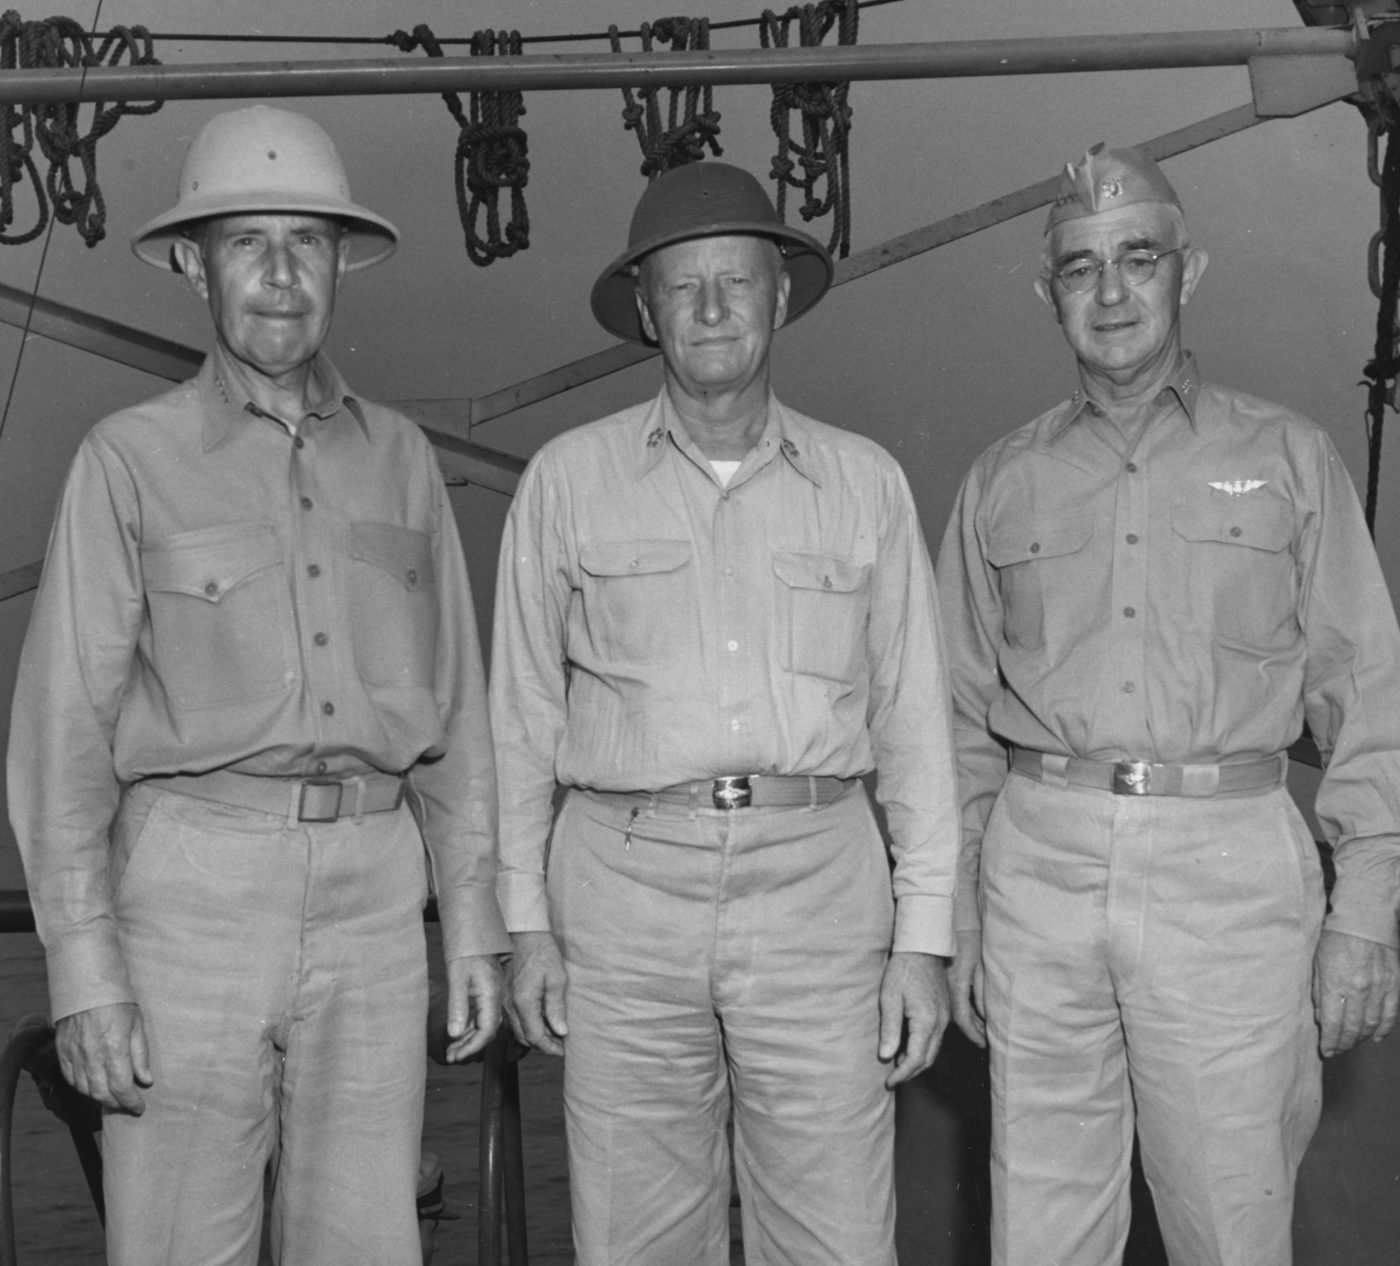 Pictured left to right: Admirals Raymond A. Spruance, Chester W. Nimitz, and Richmond Kelly Turner on board a ship off Okinawa, 1945. (National Archives)